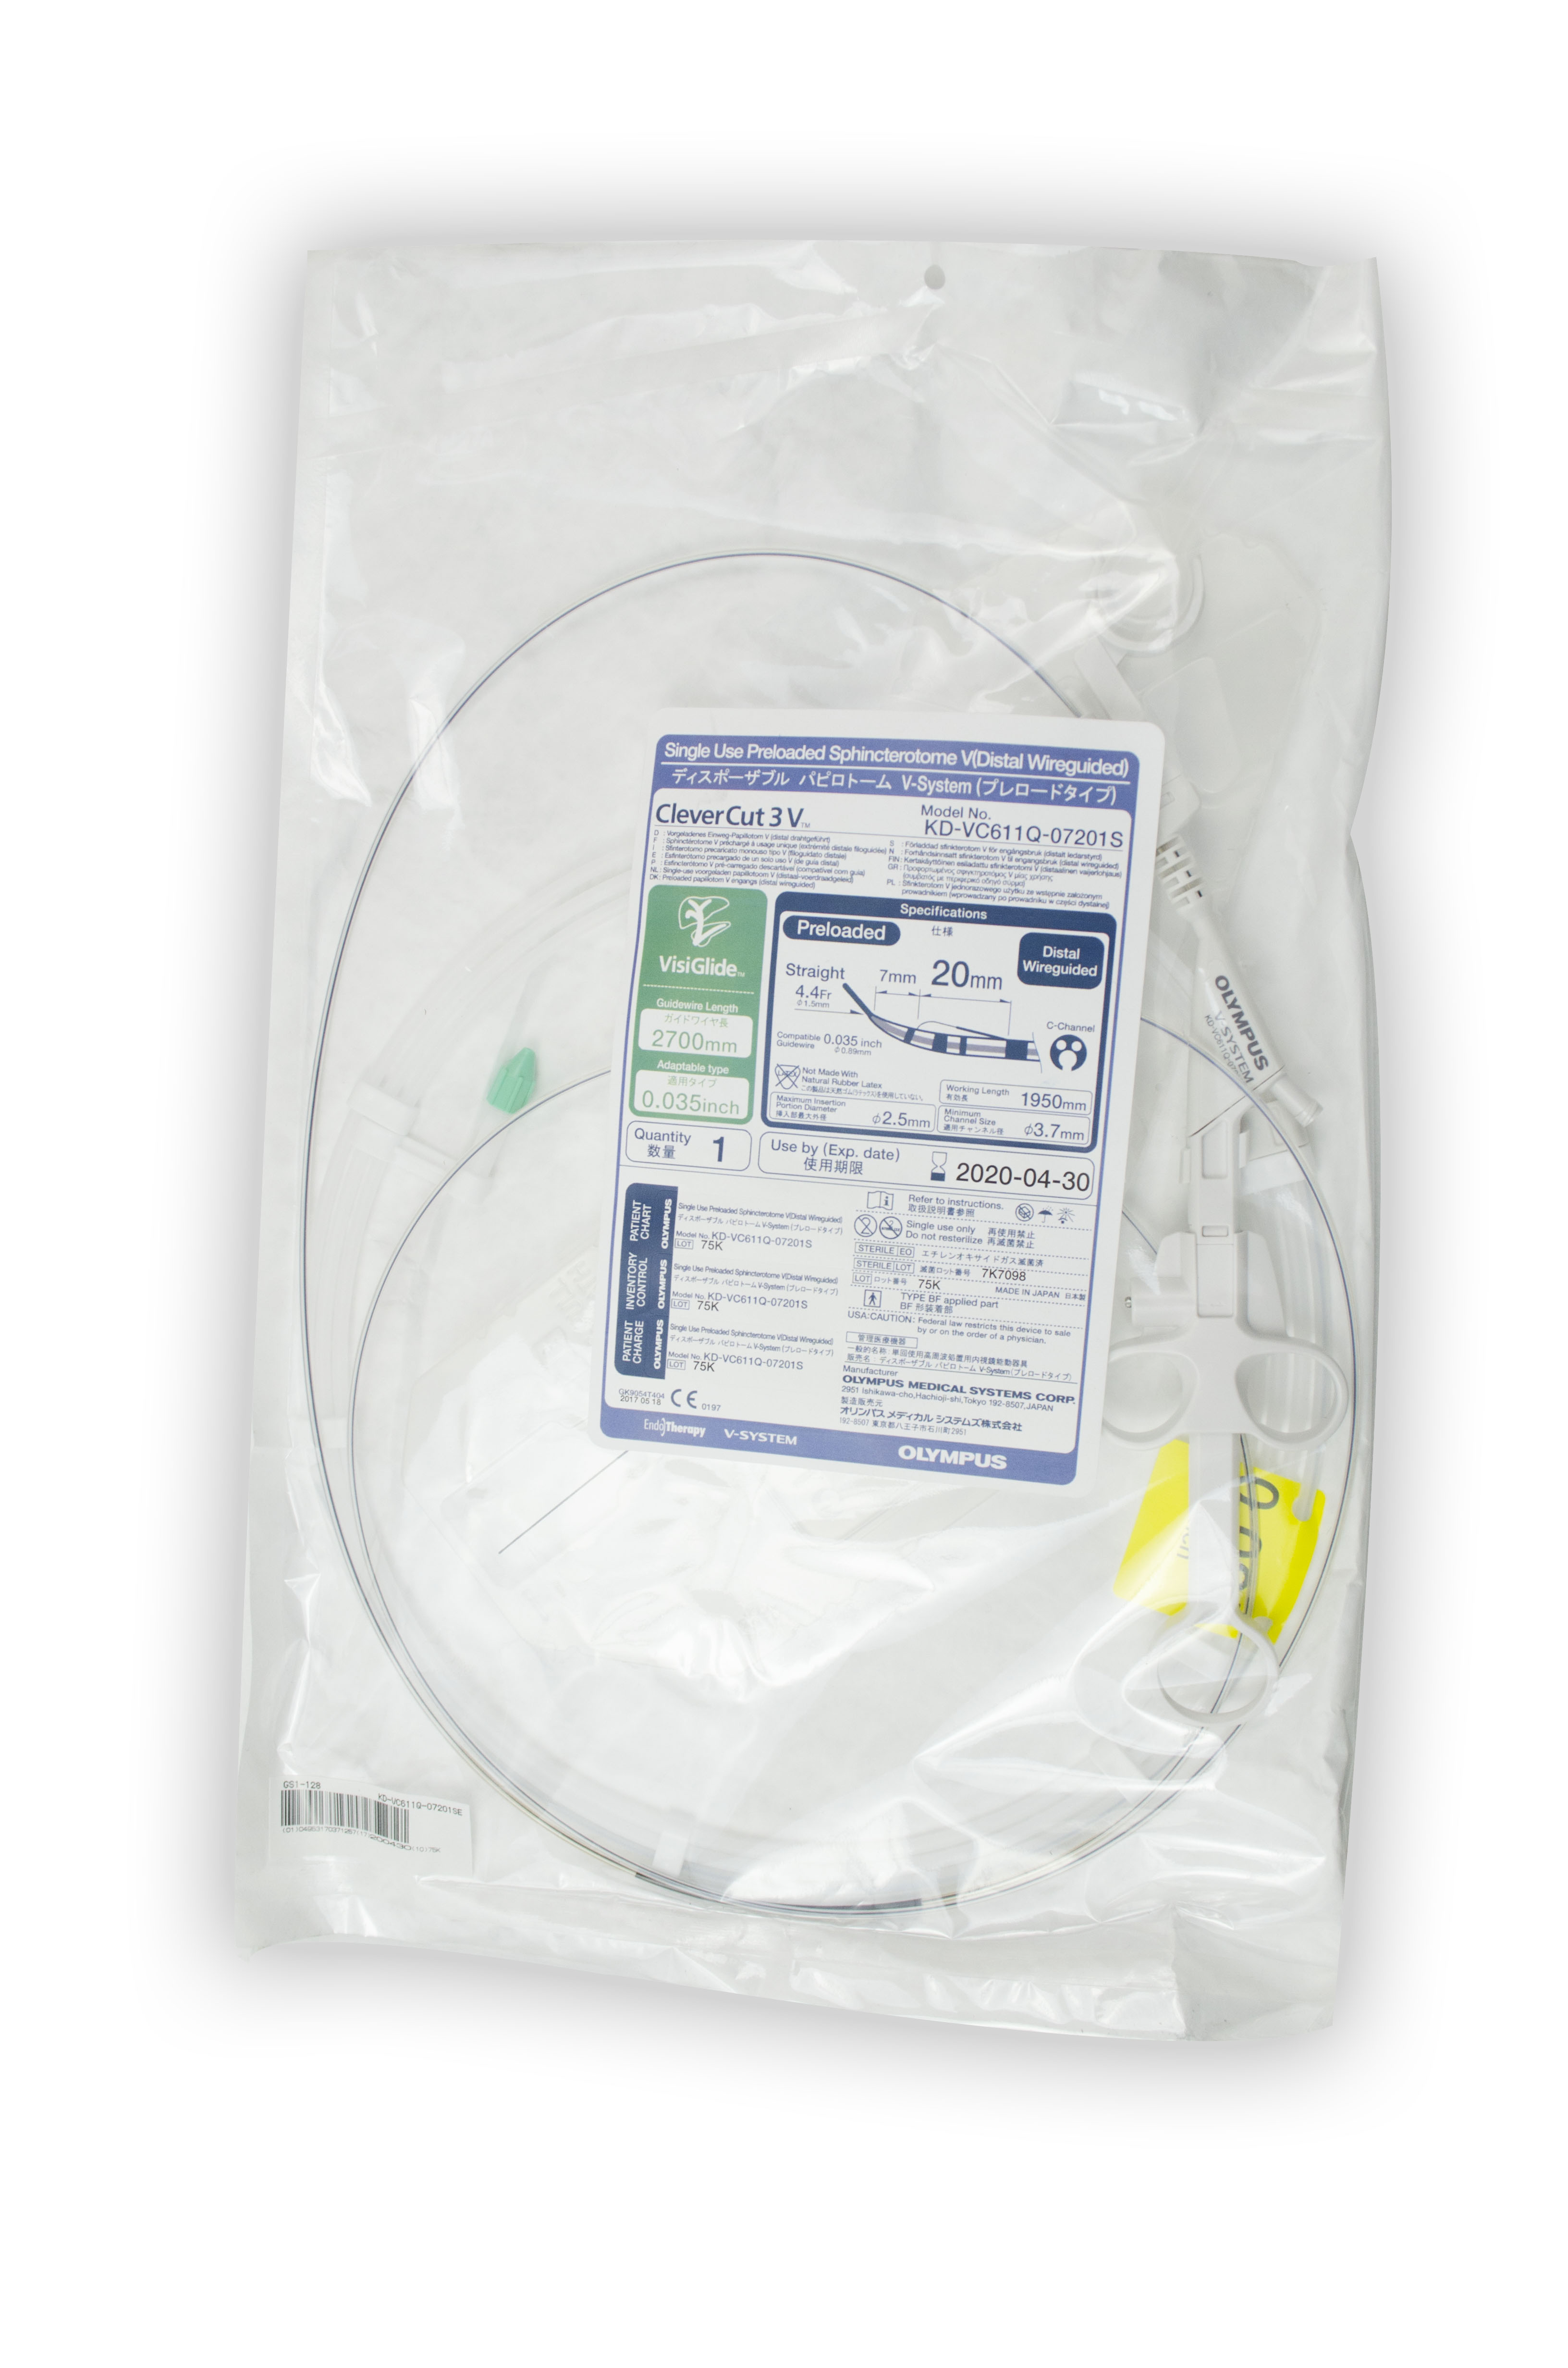 [In-Date] Olympus Disposable Sphincterotome (V Distal Wireguide) - KD-VC611Q-07201S (Original Packaging)